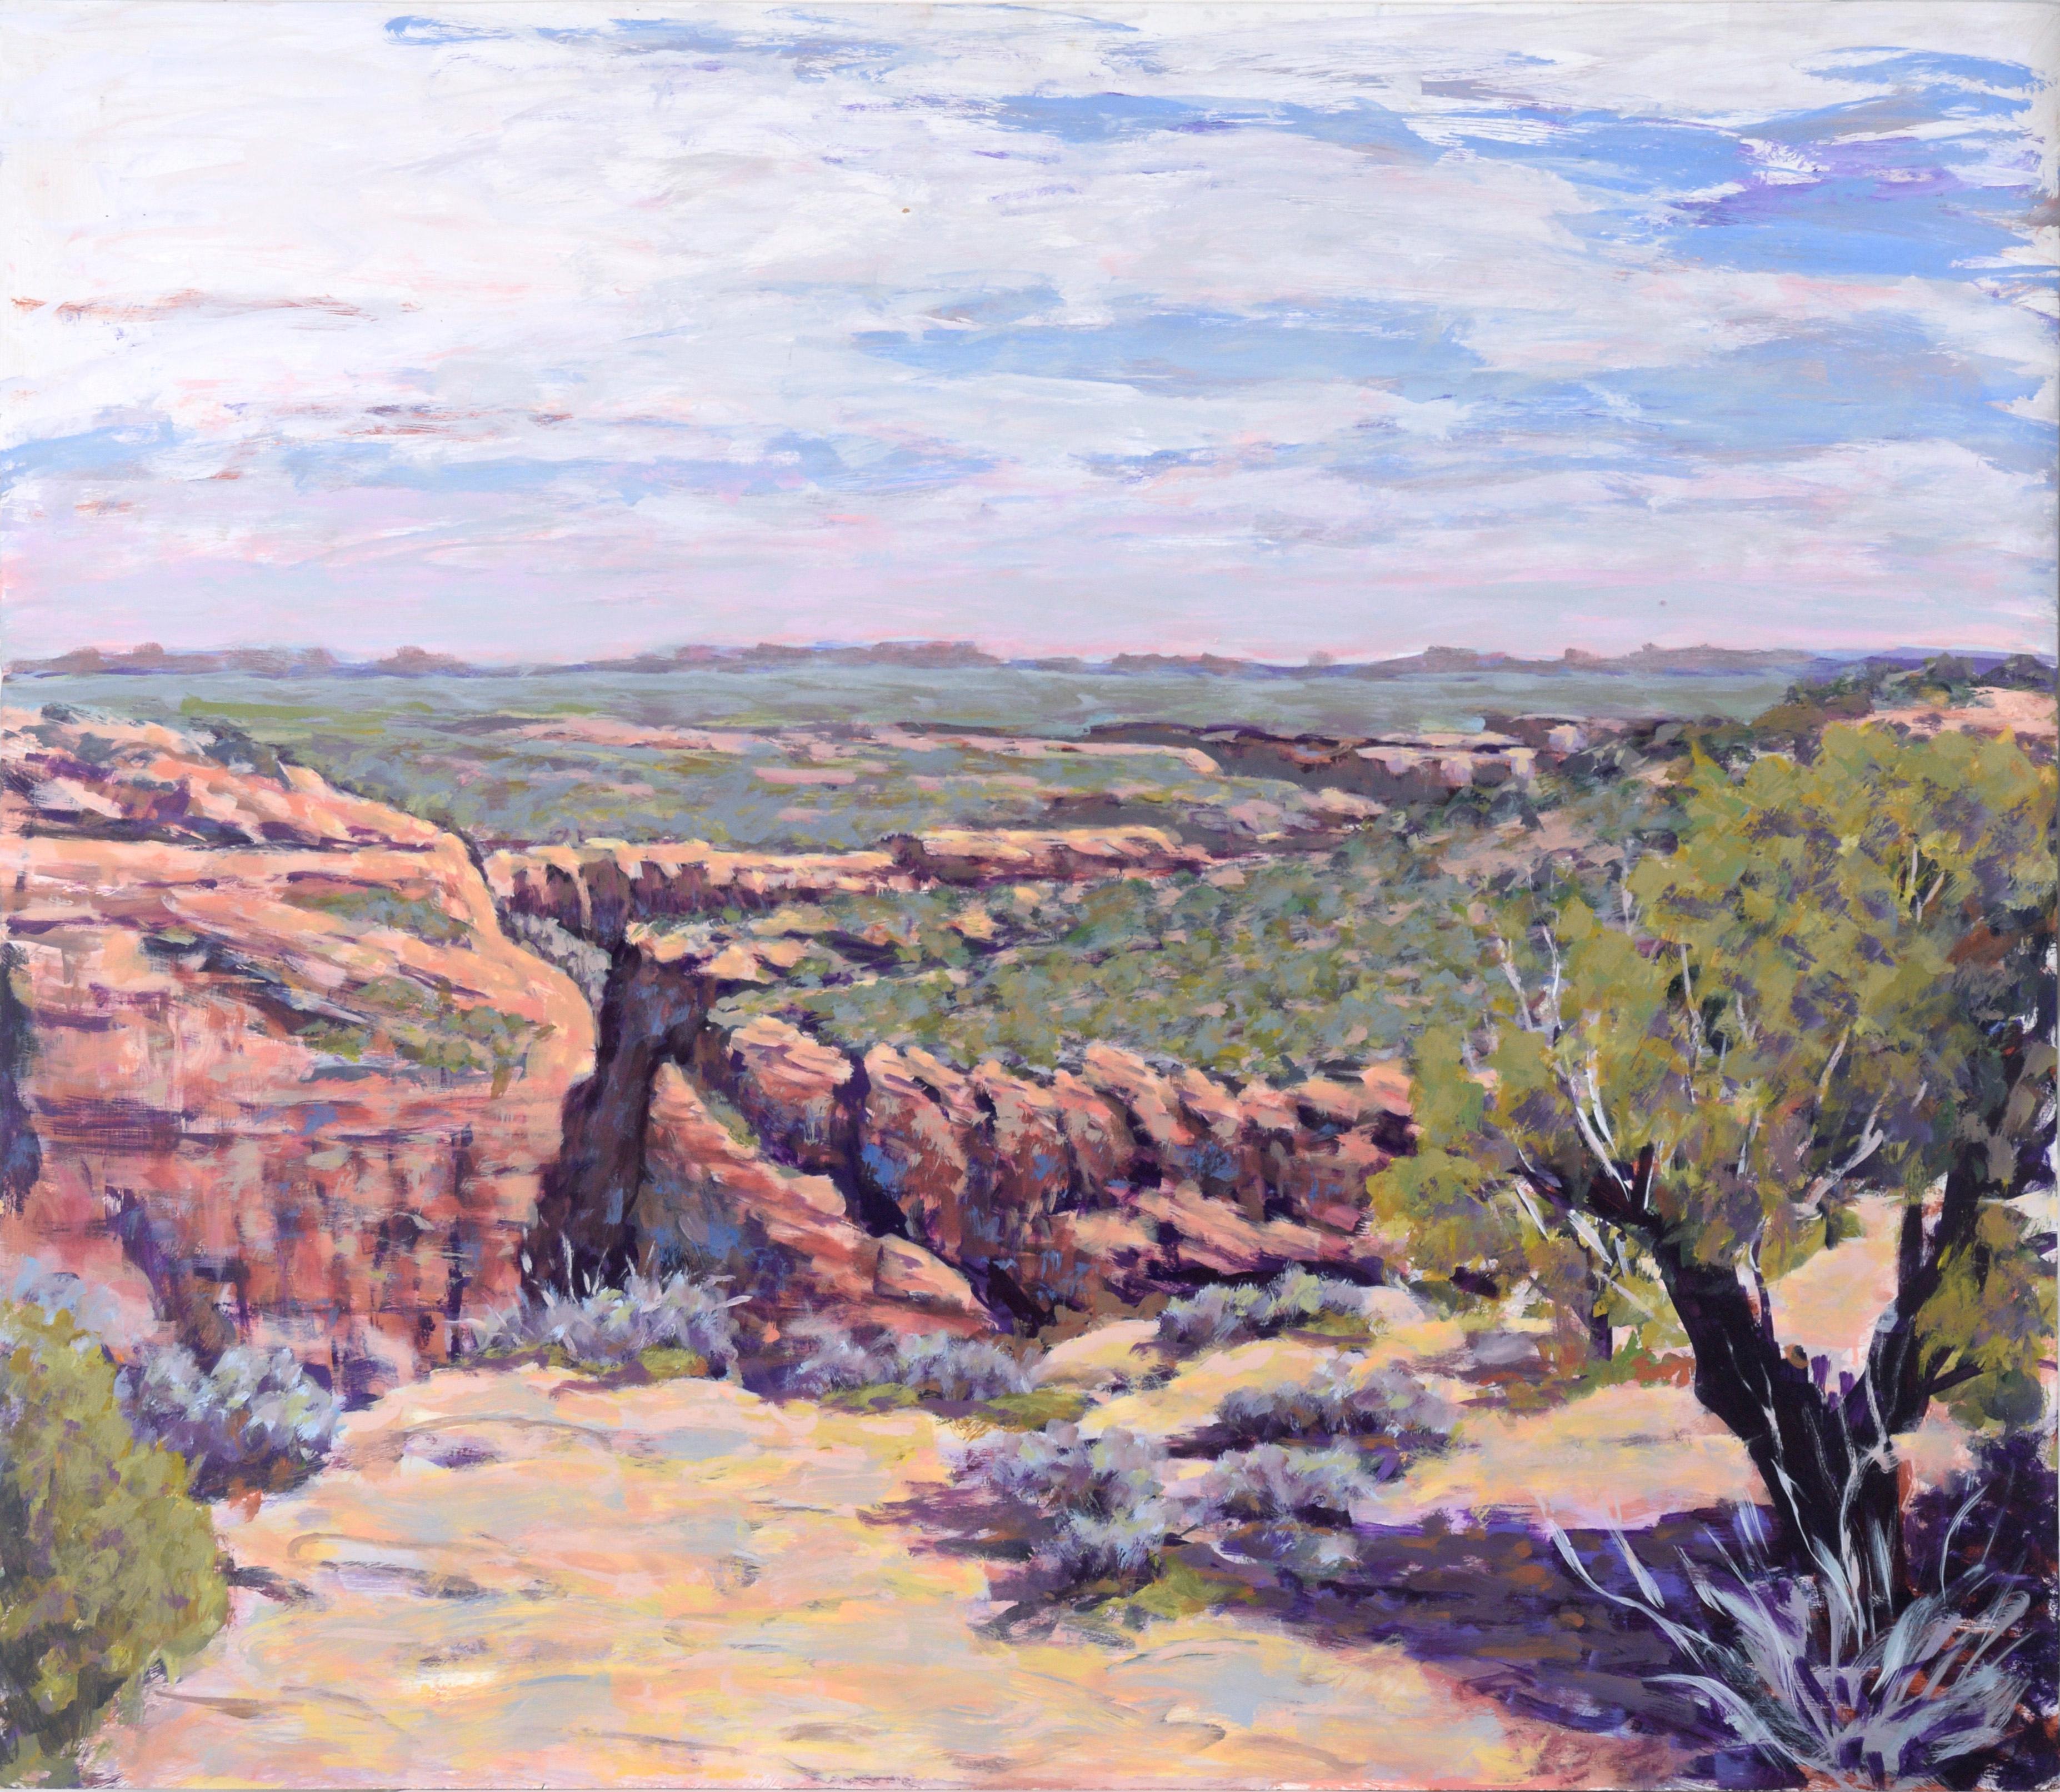 Looking Out Over the Canyons – Western Plein Aire Landschaft aus Acryl auf Karton